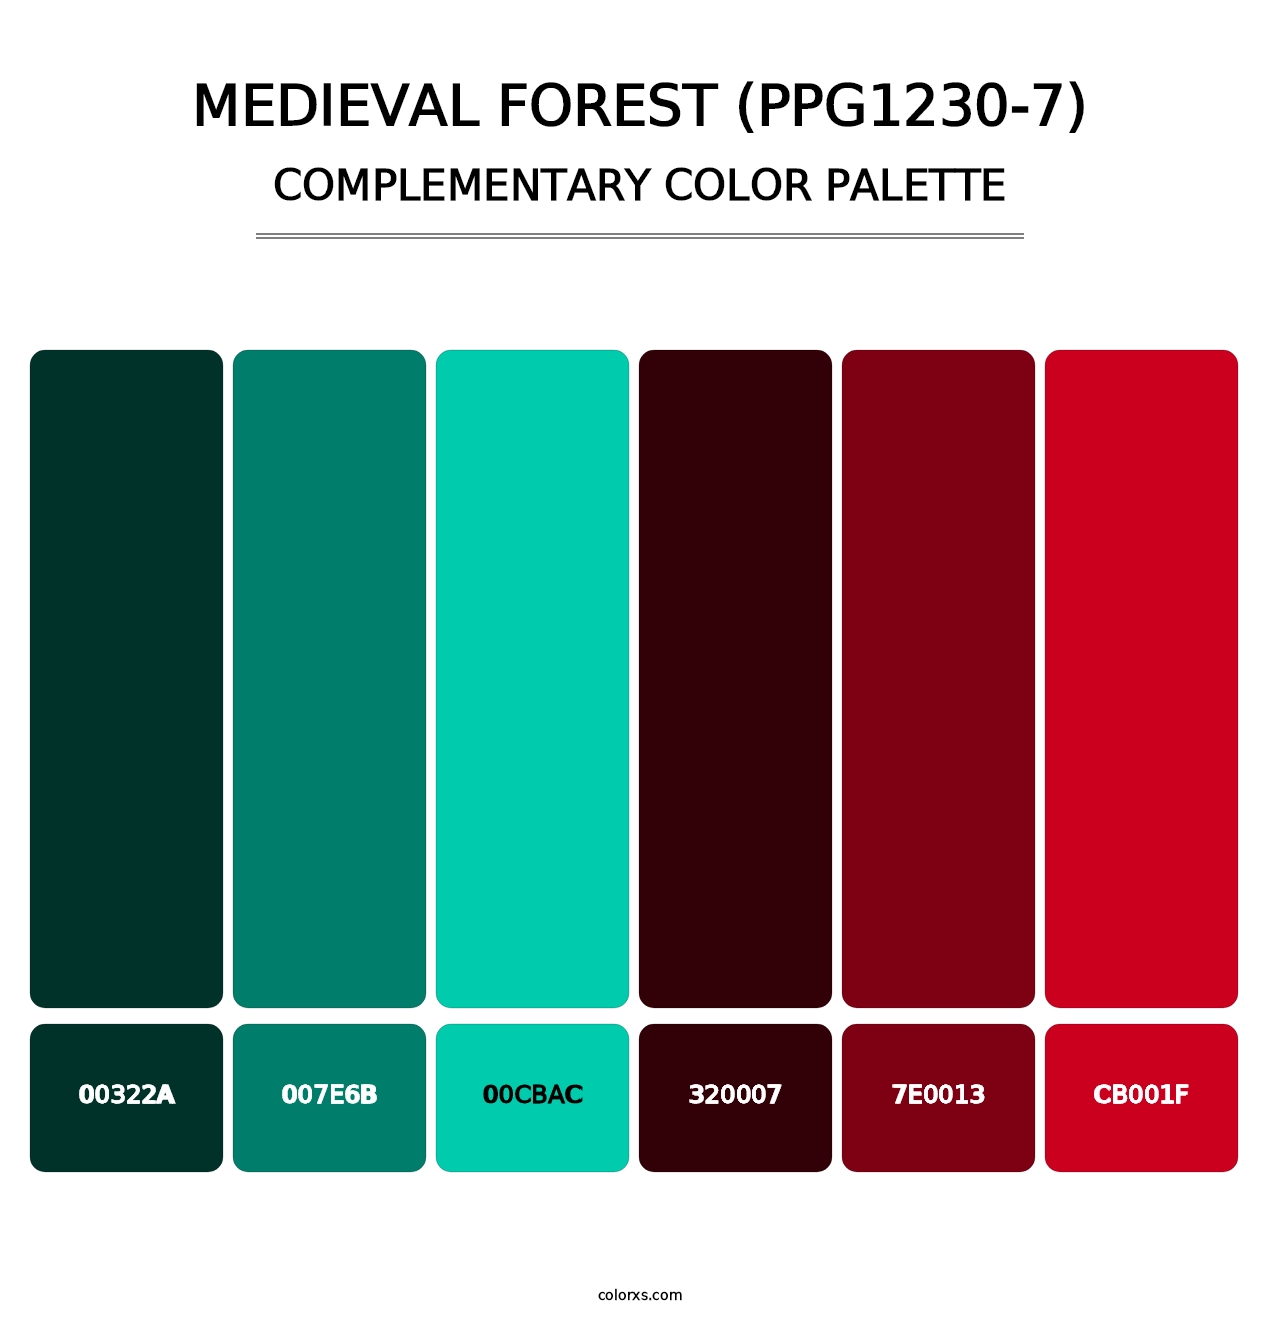 Medieval Forest (PPG1230-7) - Complementary Color Palette